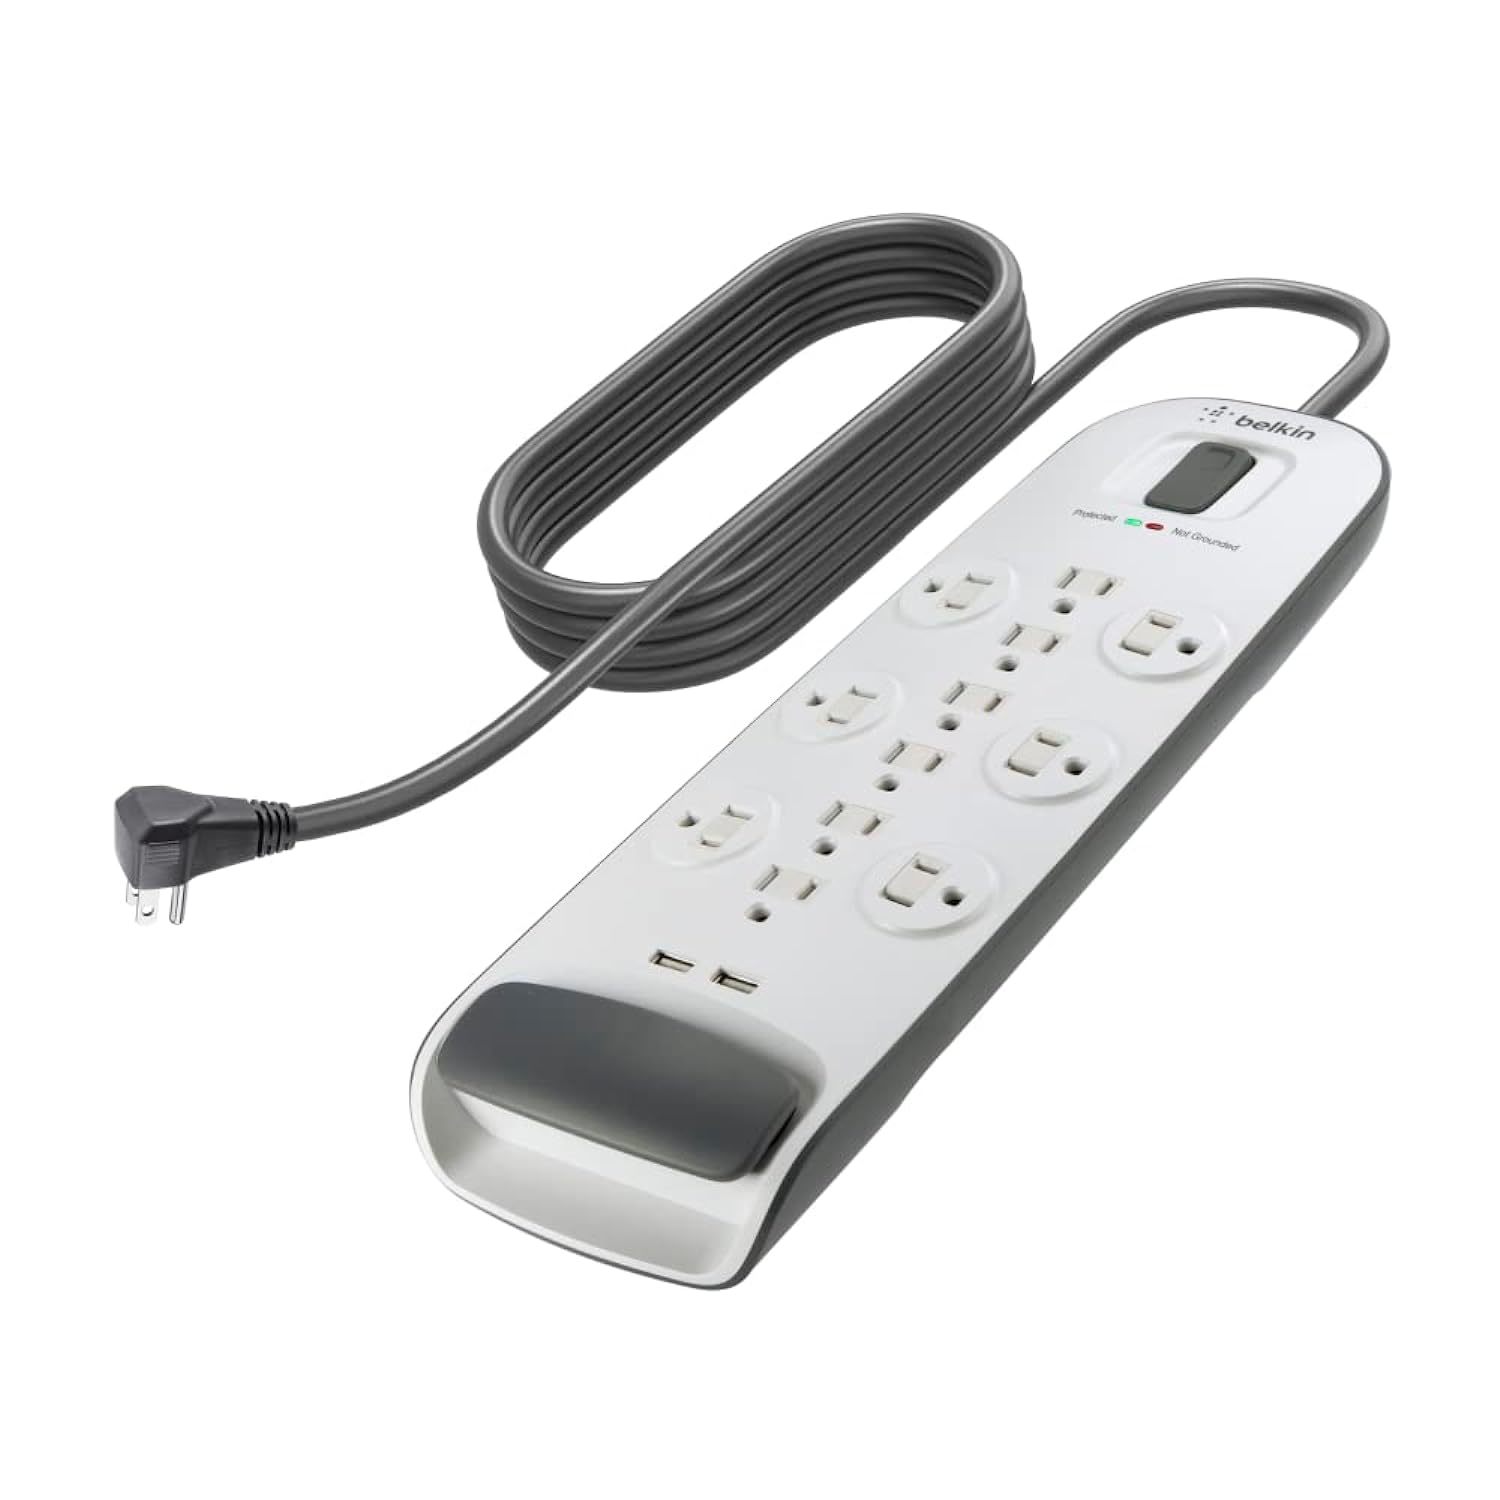 Primary image for Belkin USB Power Strip Surge Protector - 12 AC Multiple Outlets & 2 USB Ports - 